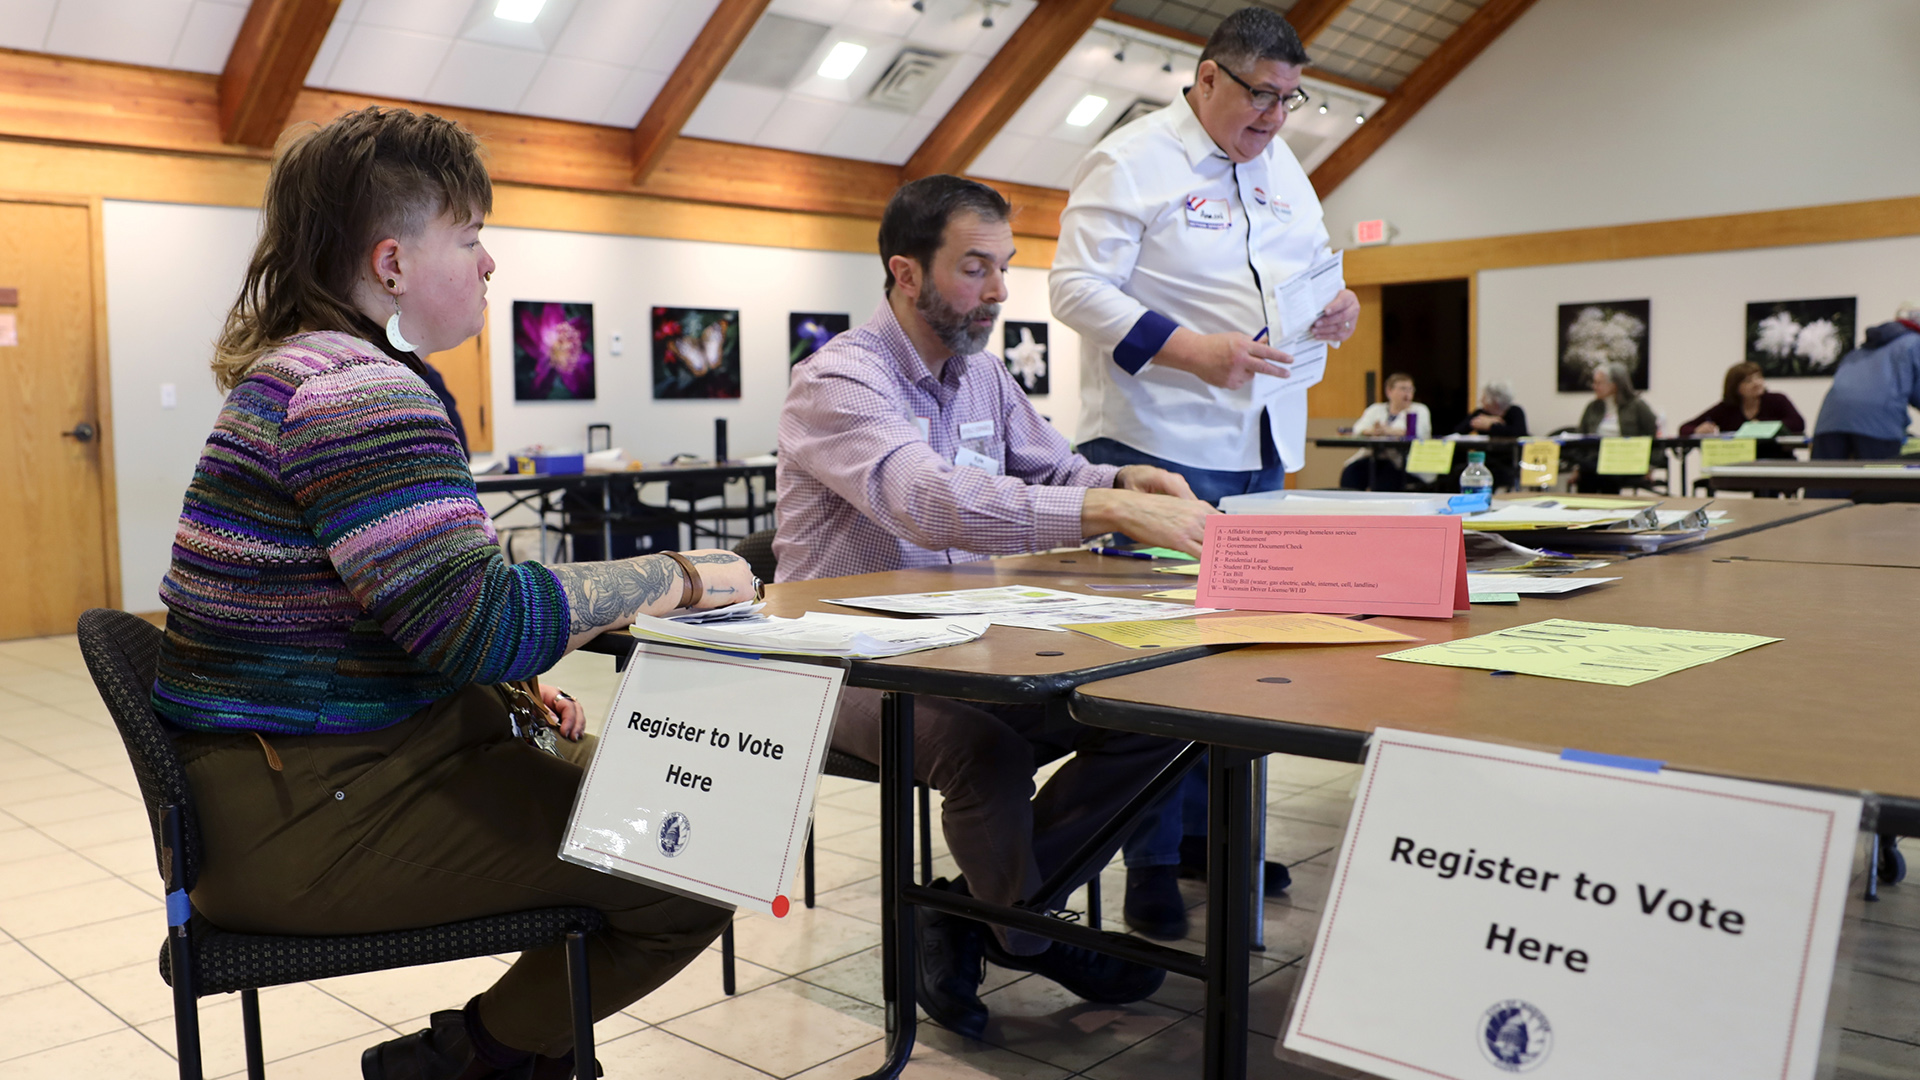 Alix Yarrow sits at a table with Kyle Richmond, with Aaron Schultz standing nearby, with signs reading "Register to Vote Here" affixed to its edge and other people seated at tables in the background of a large room with a pitched ceiling.